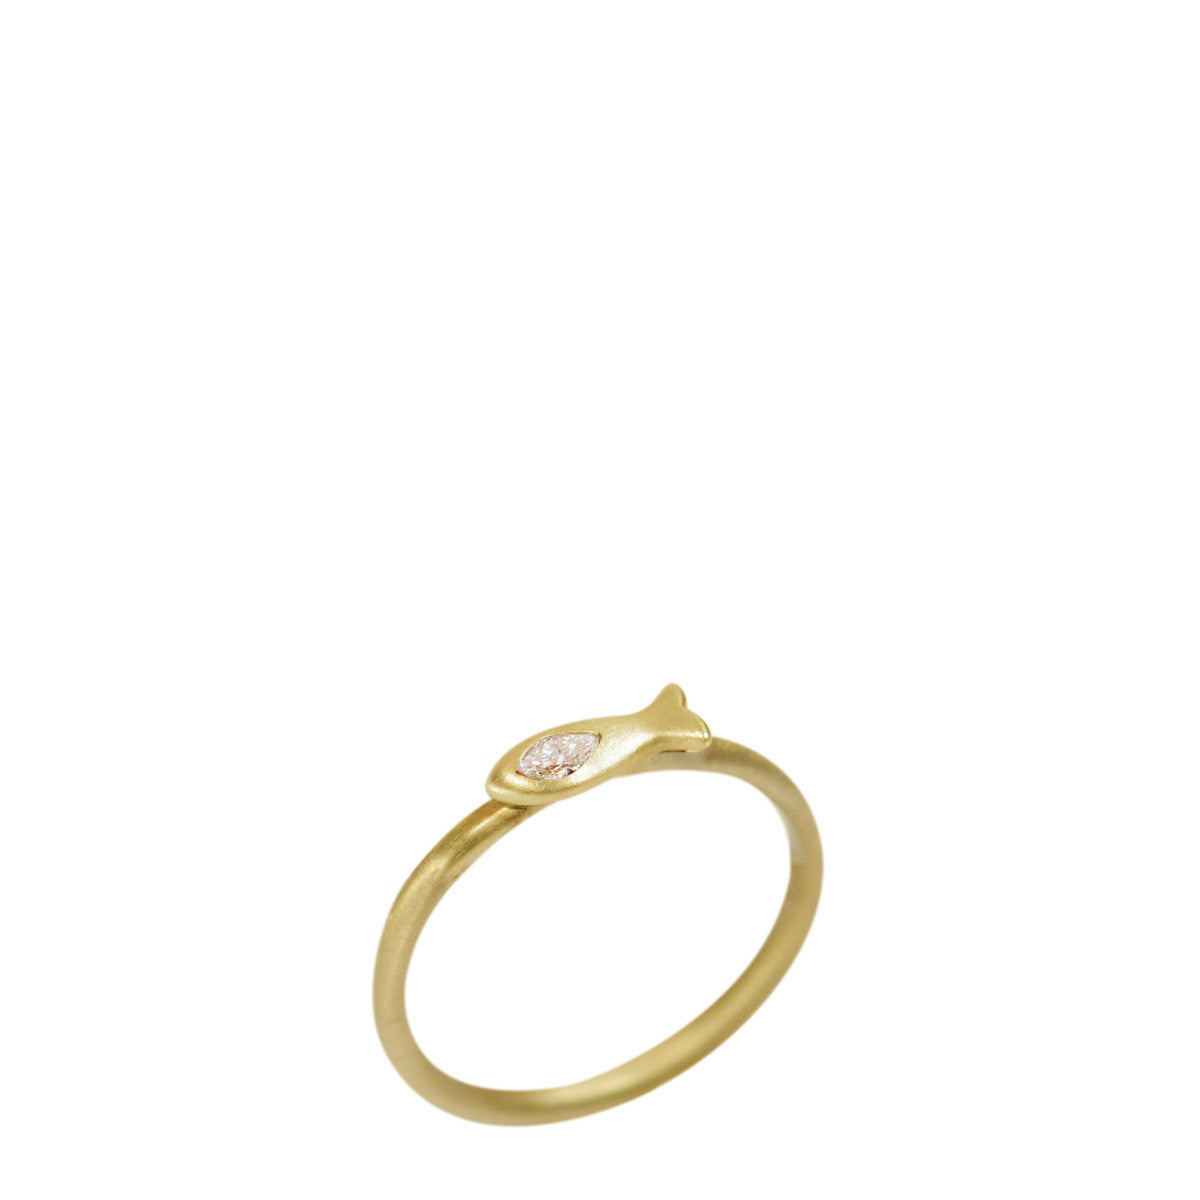 18K Gold Tiny Fish Ring with Marquise Diamond